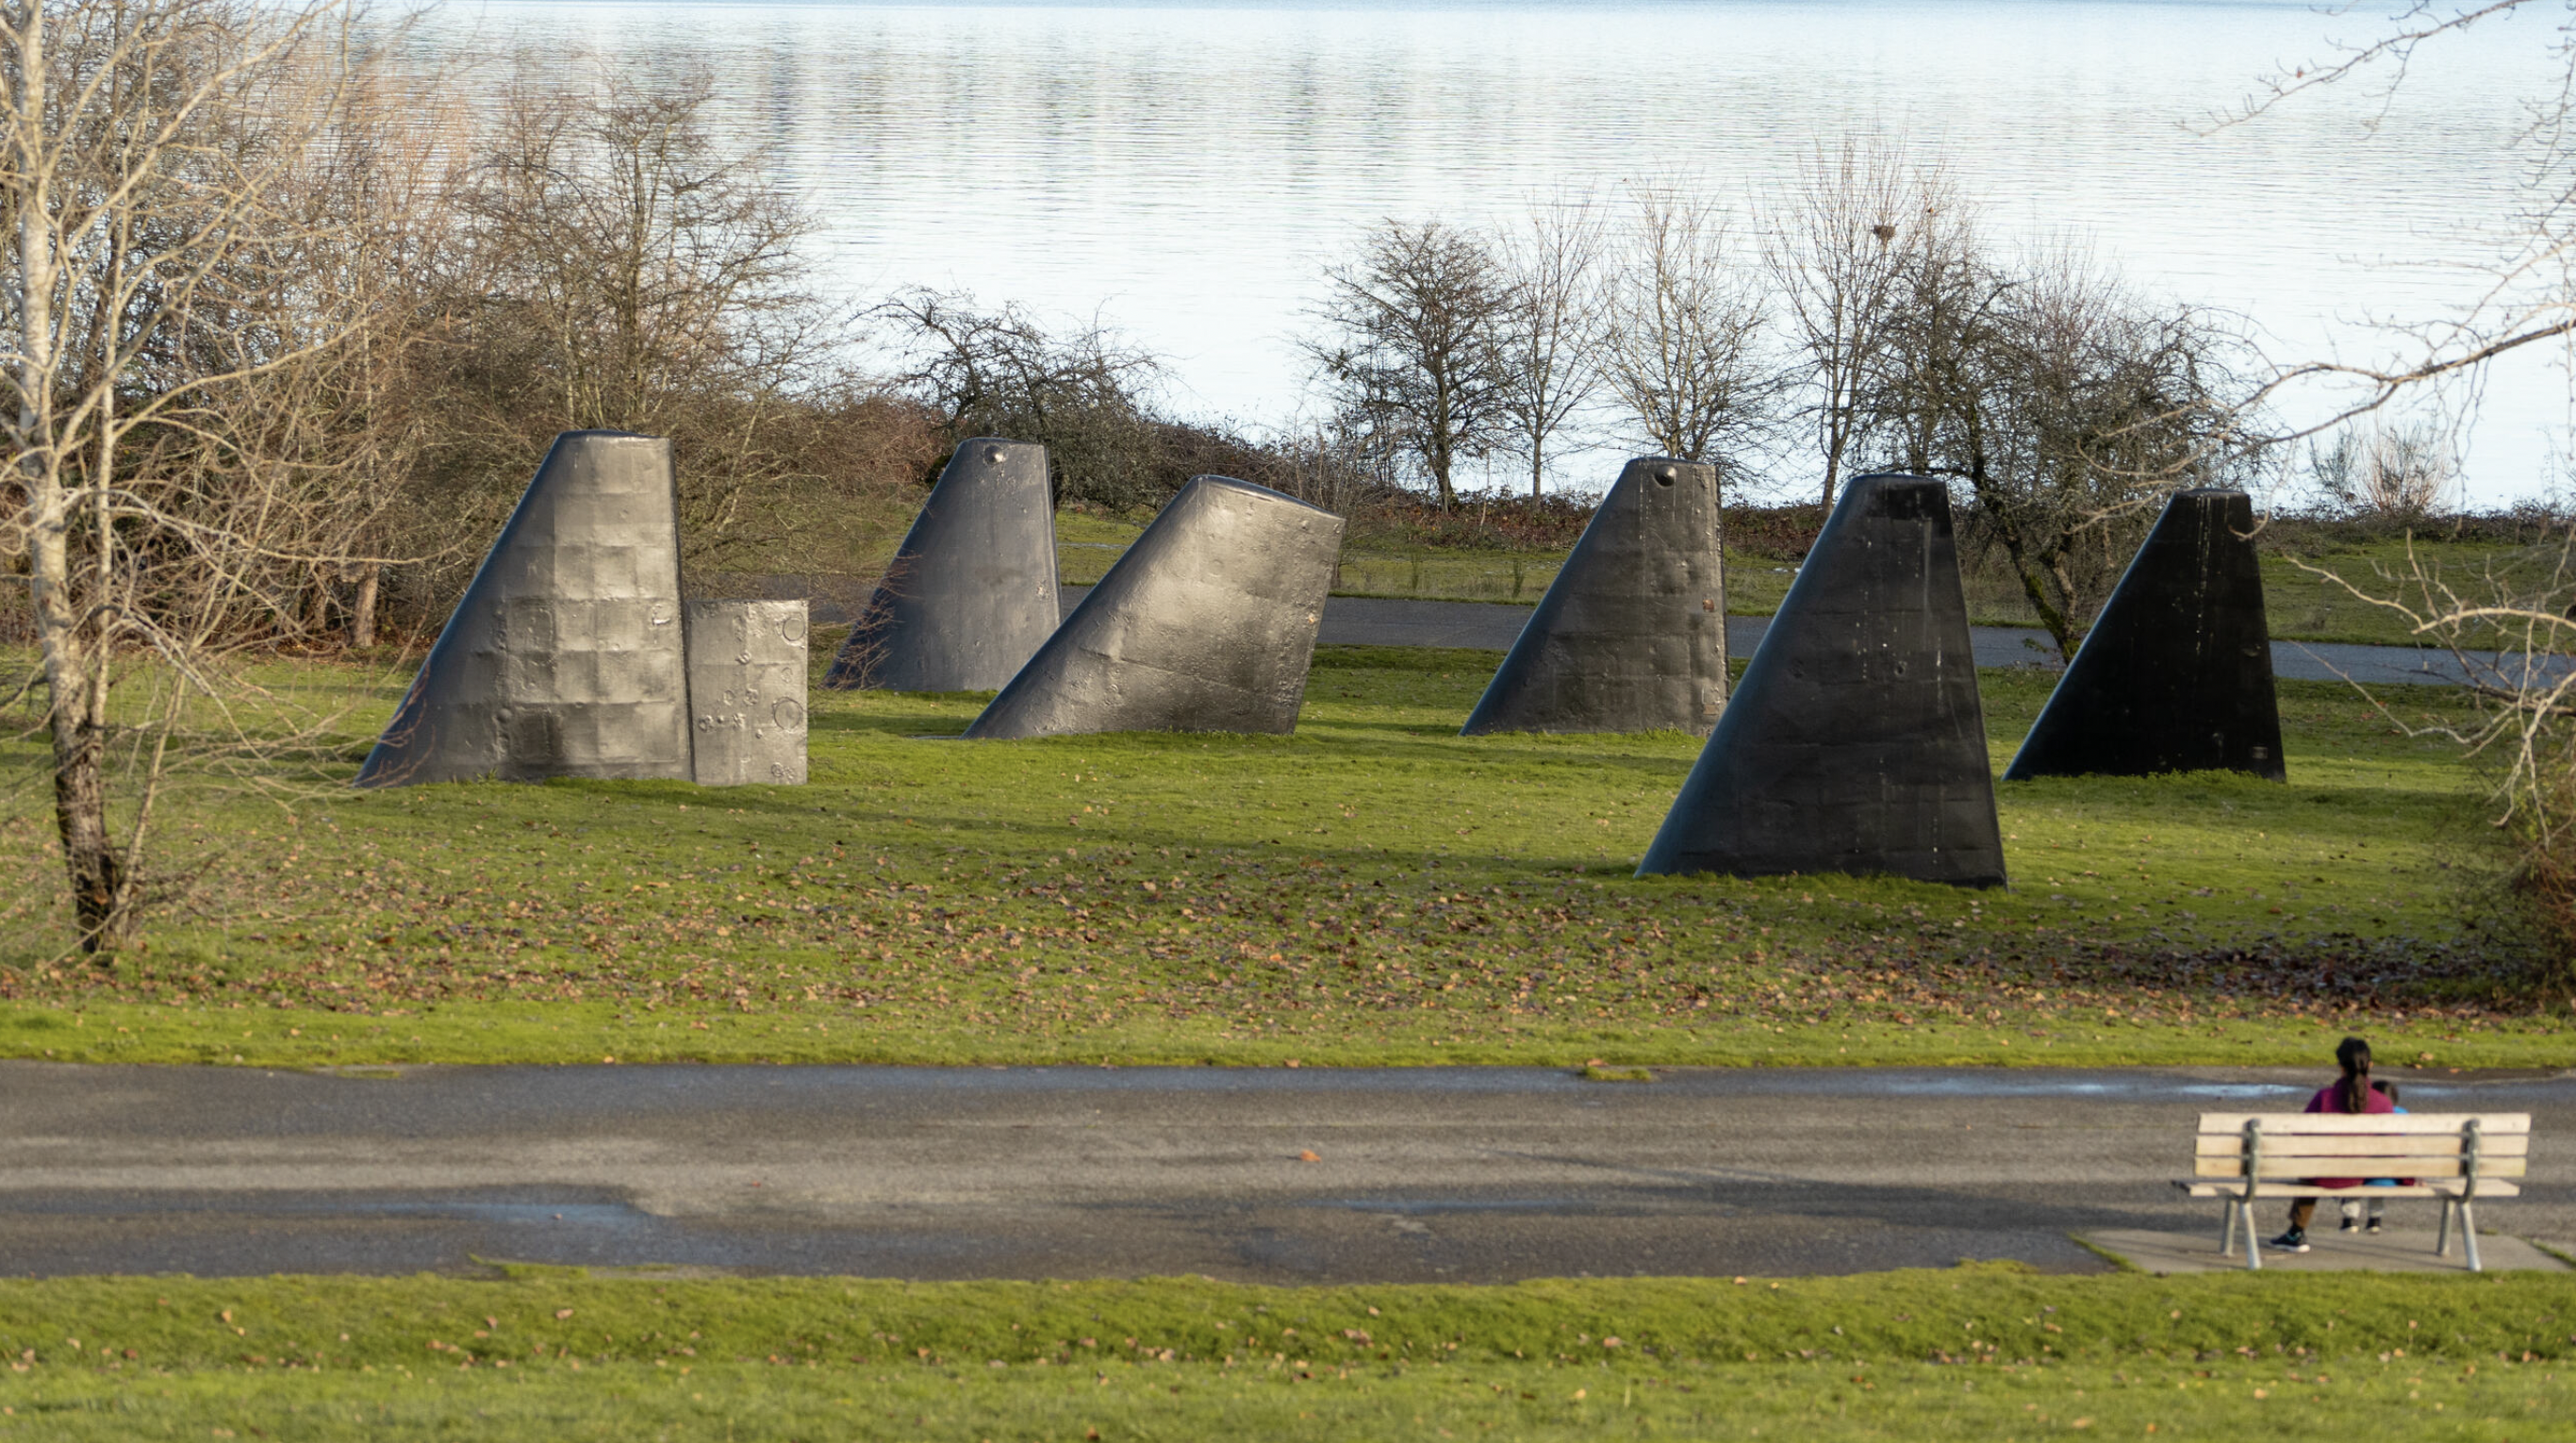 A shot of “The Fin Project: From Swords into Plowshares” by sculptor John T. Young at Magnuson Park on a winter afternoon.